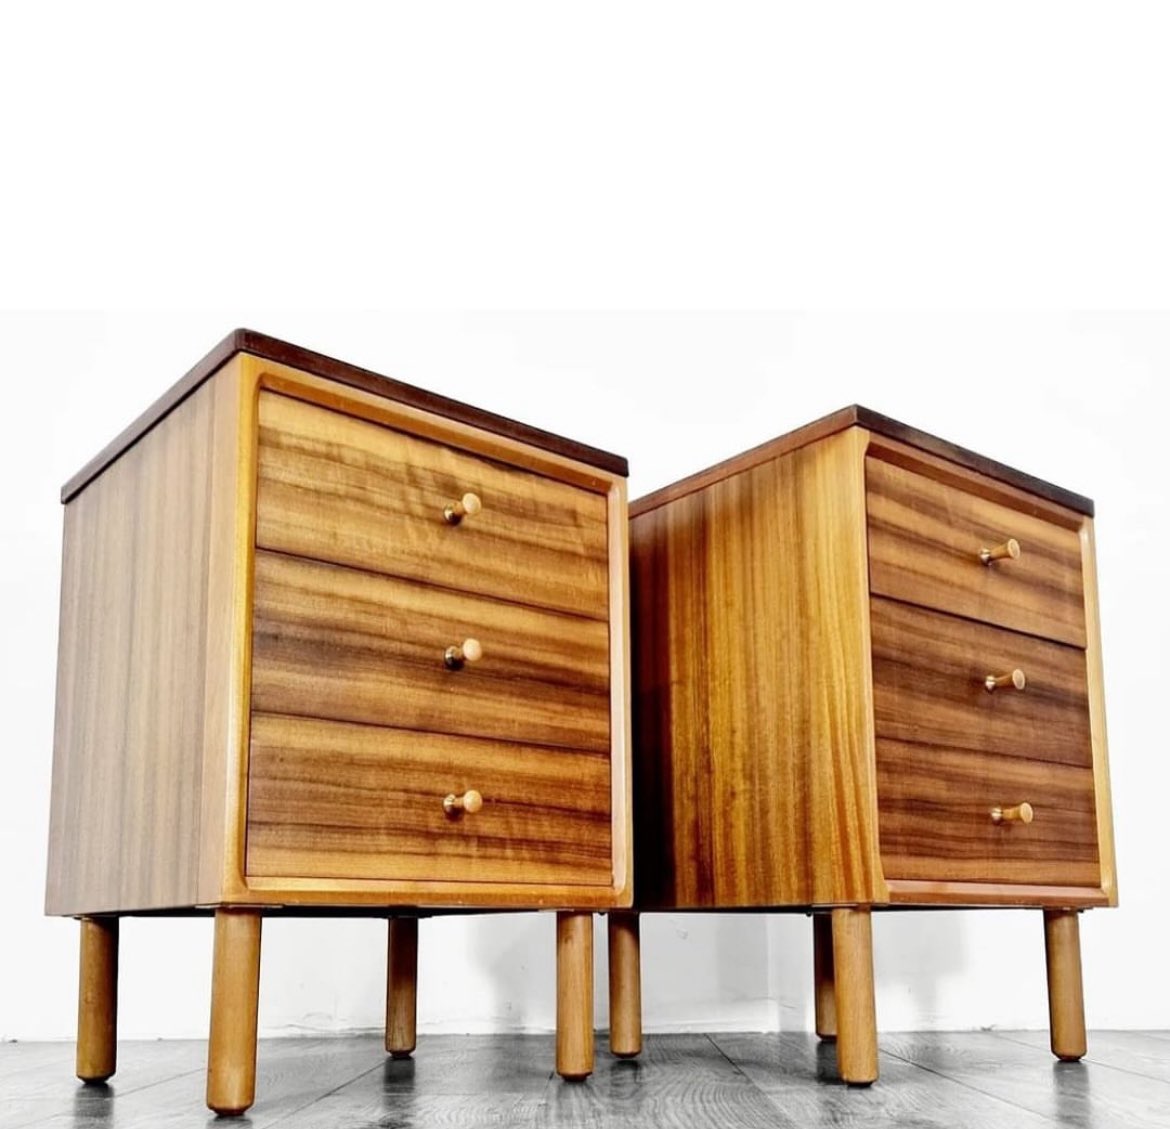 Happy weekend guys! Check out these Mvule Wood bedside tables. Featuring clear wood varnish, cnc cut edges for the face & quality knobs screwed in tight, this is the best purchase you could make for your bedroom yet. Price is Ksh 35,000. To order, send me a DM! Kindly RT.